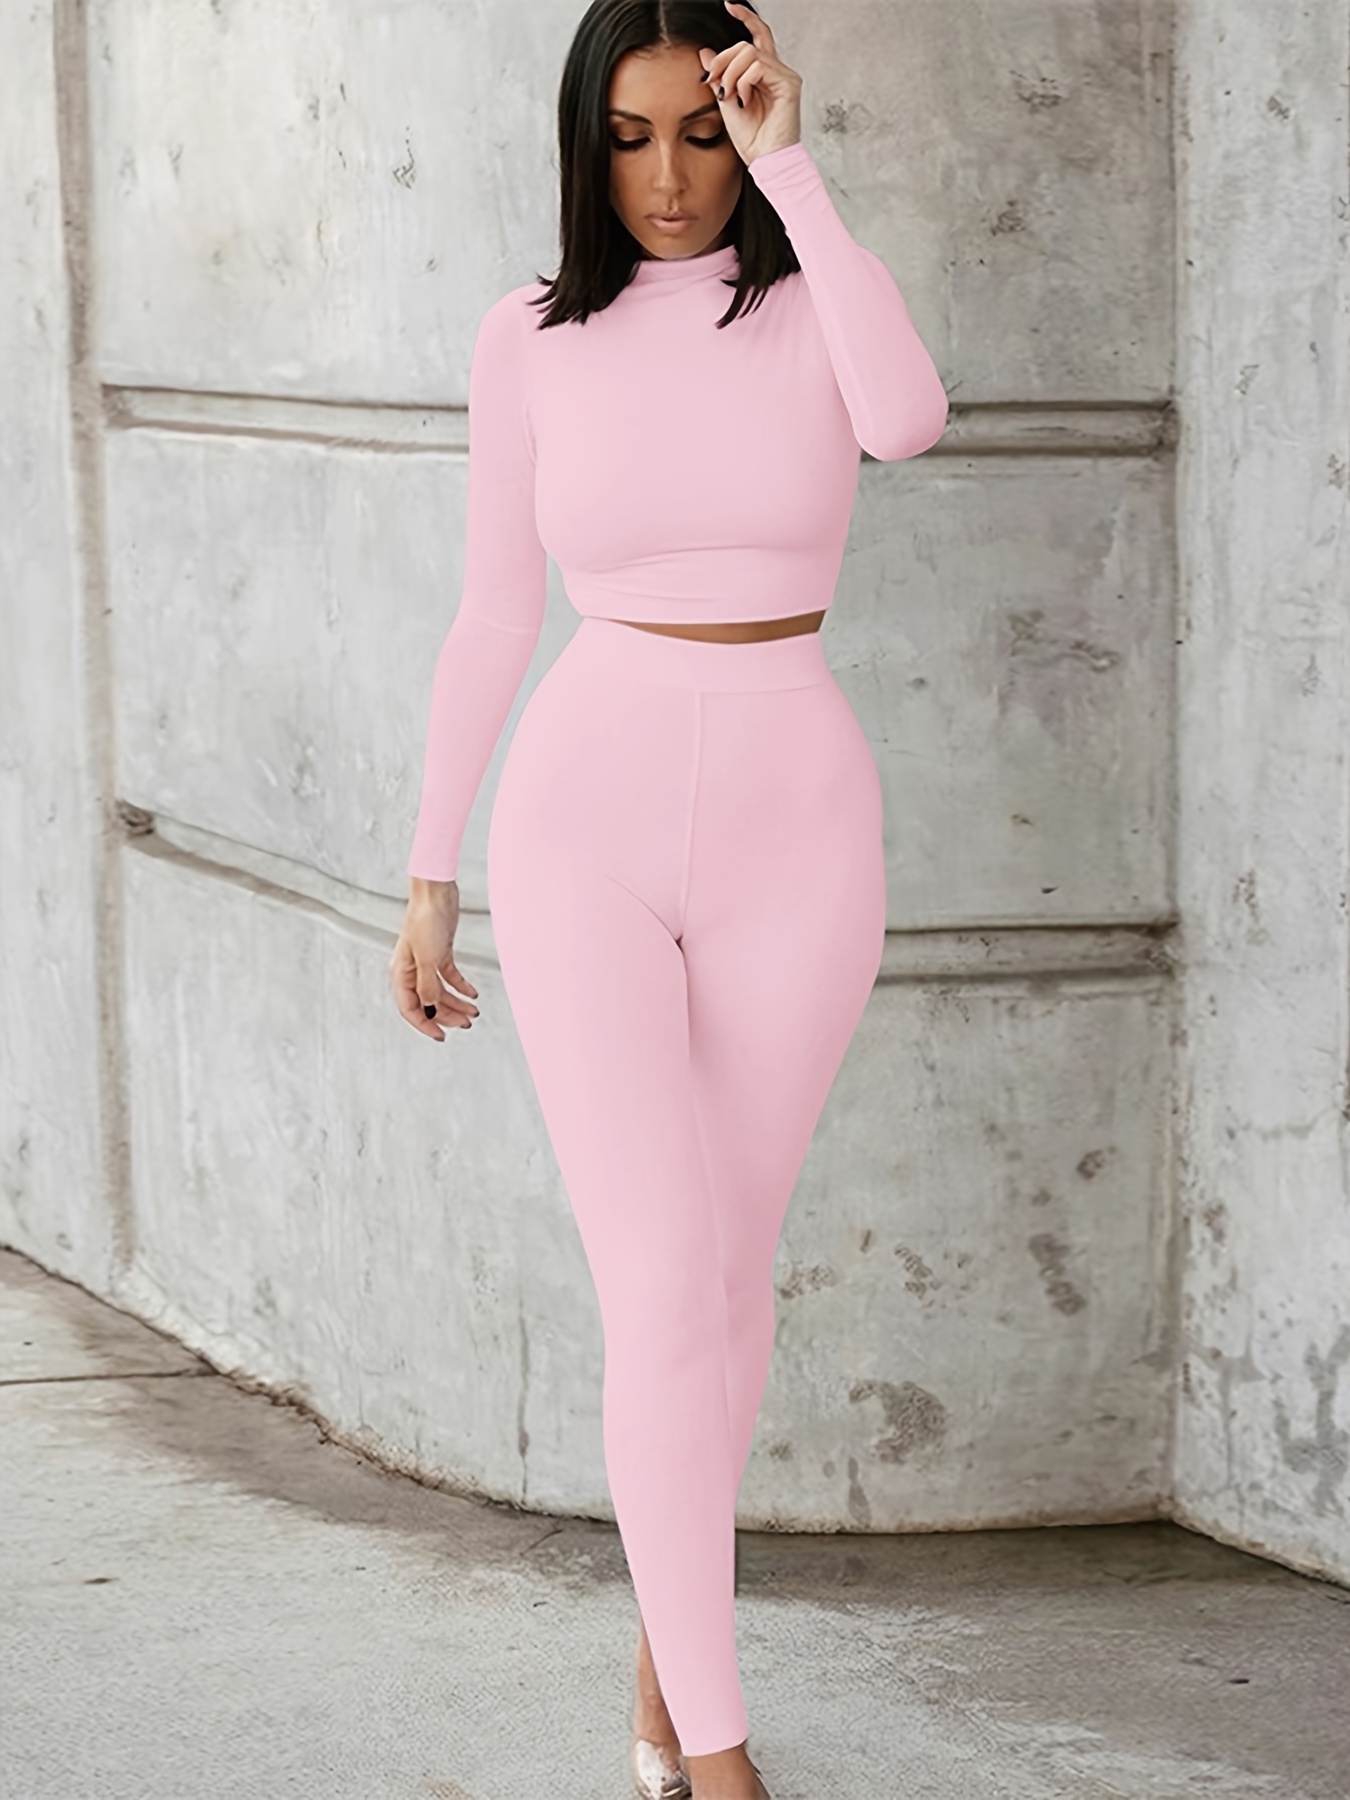 Hot Pink Cropped Top with Leggings Outfits (2 ideas & outfits